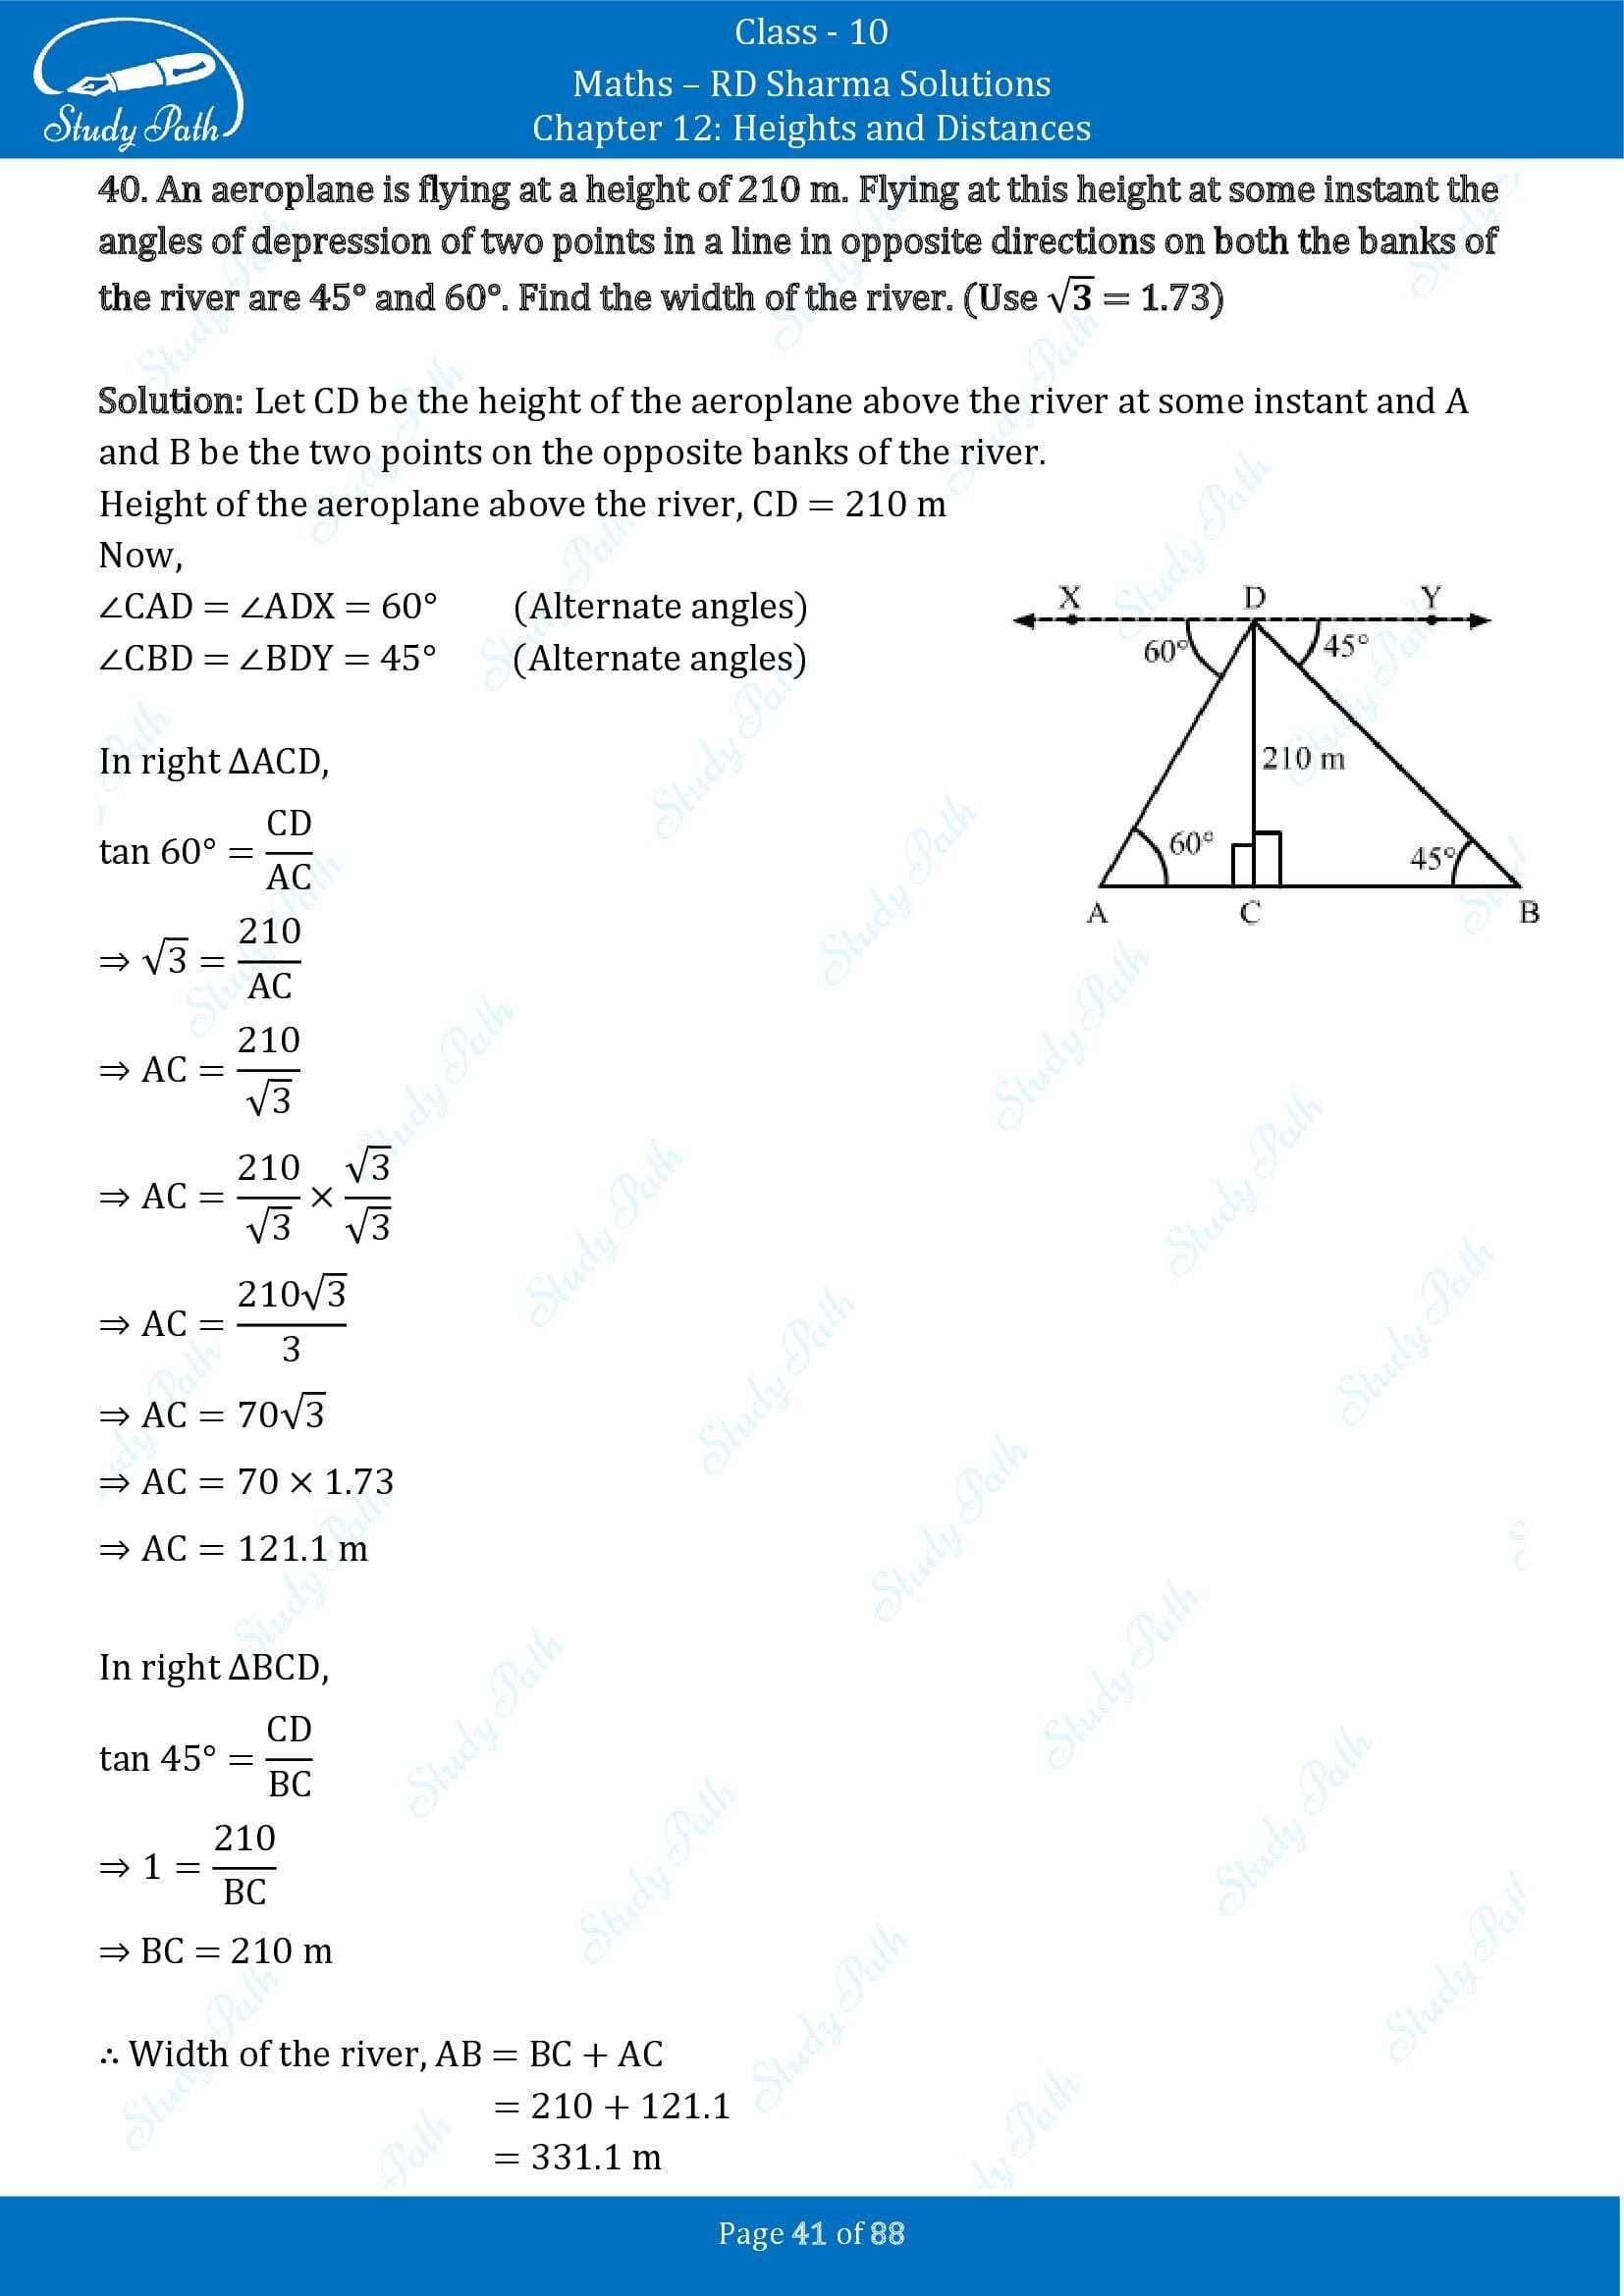 RD Sharma Solutions Class 10 Chapter 12 Heights and Distances Exercise 12.1 00041